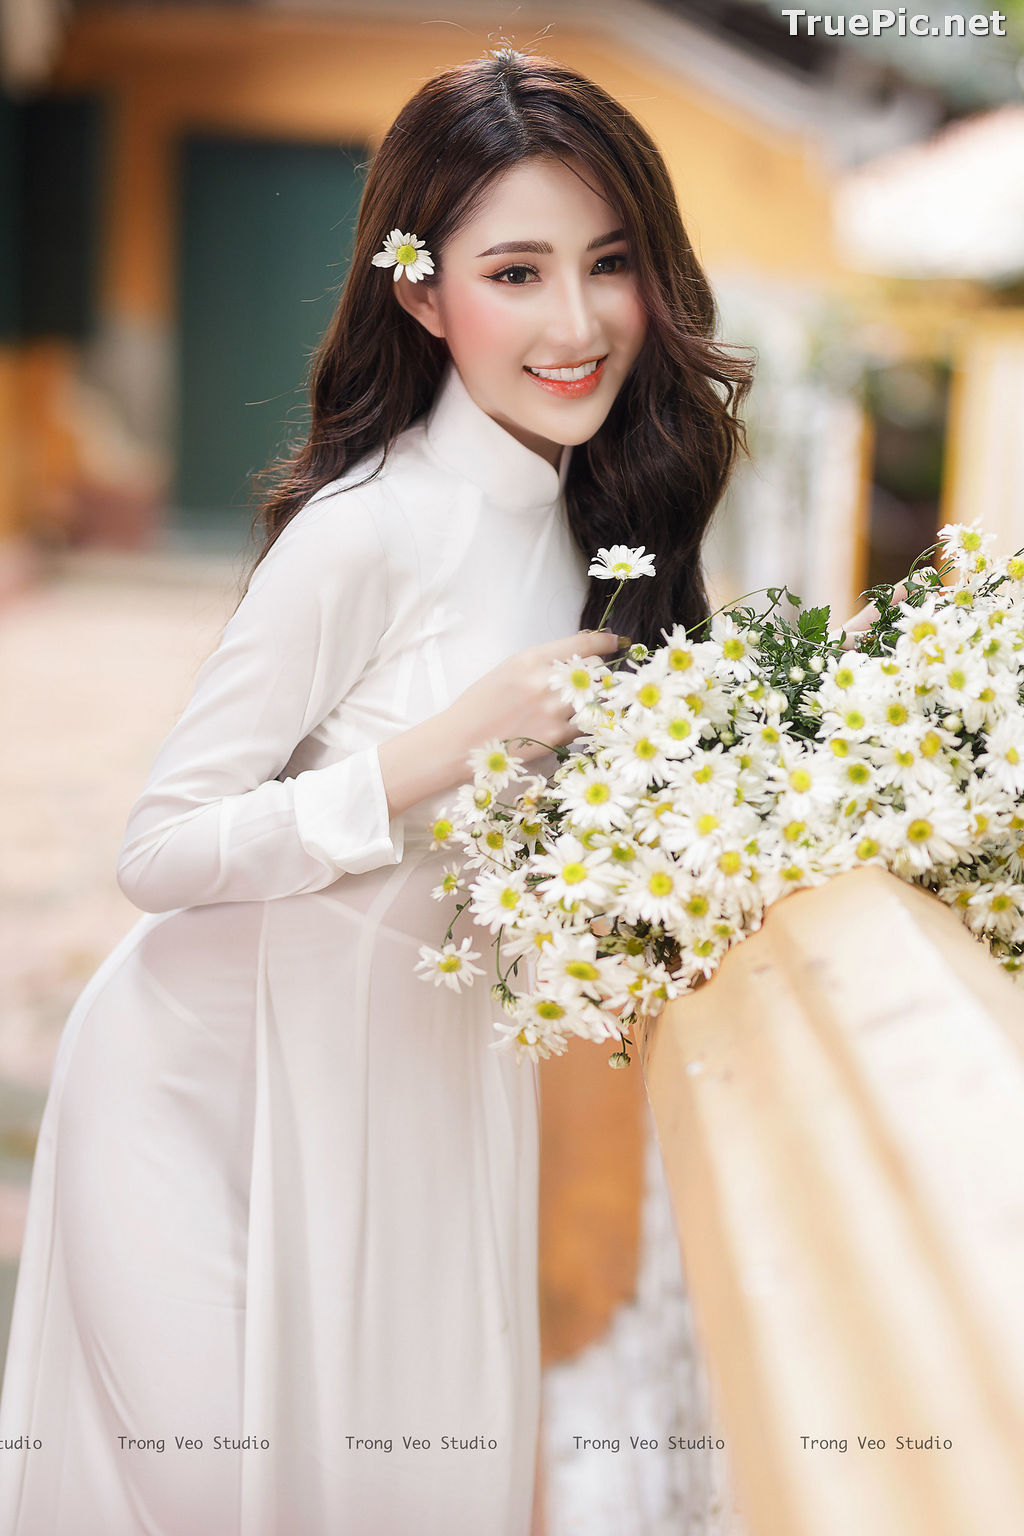 Image The Beauty of Vietnamese Girls with Traditional Dress (Ao Dai) #3 - TruePic.net - Picture-13